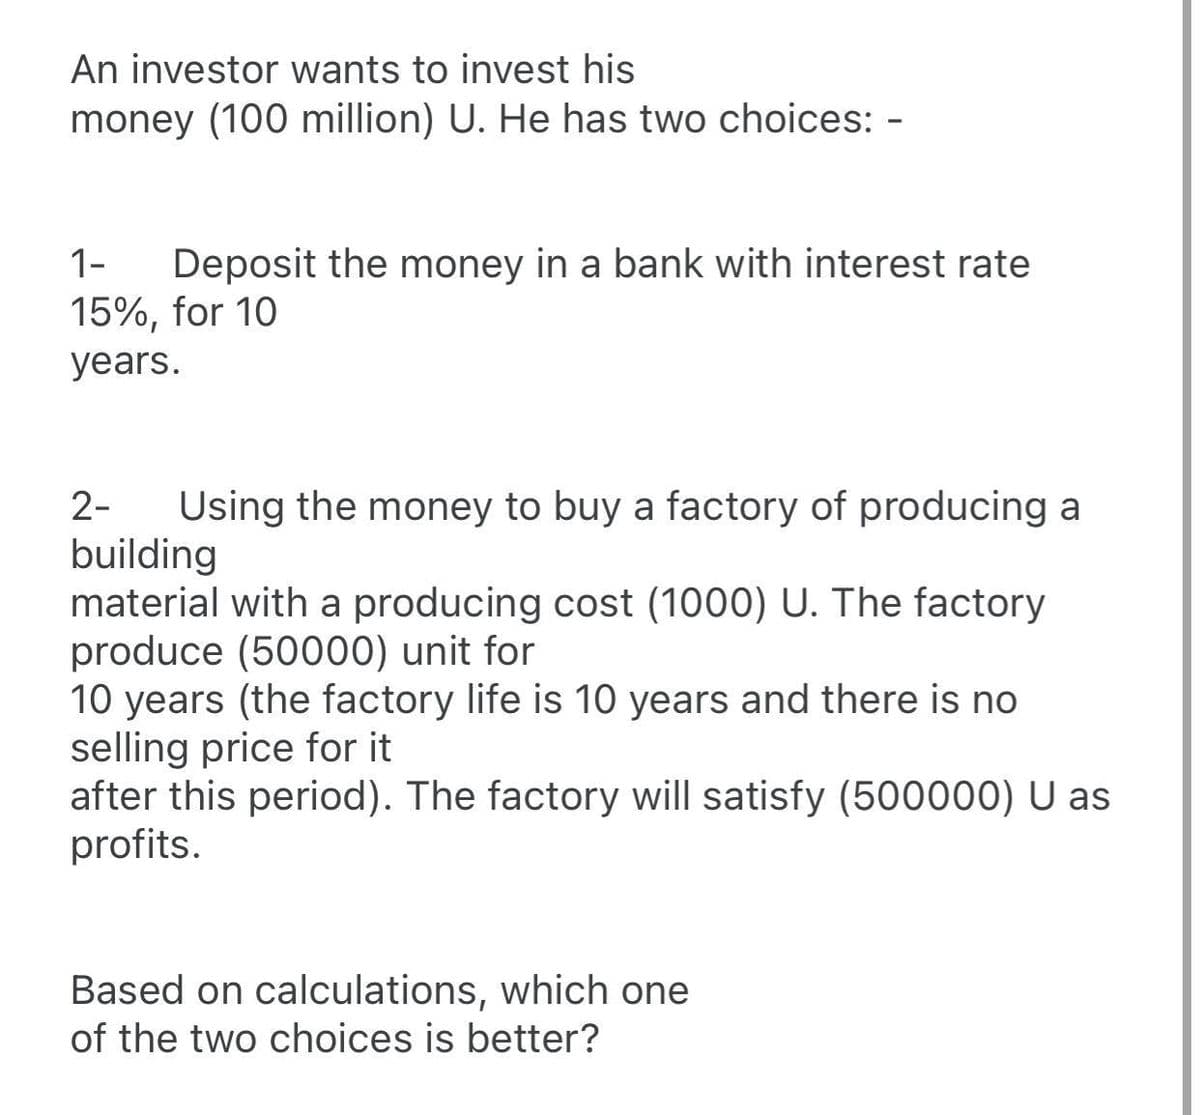 An investor wants to invest his
money (100 million) U. He has two choices: -
Deposit the money in a bank with interest rate
15%, for 10
1-
years.
Using the money to buy a factory of producing a
building
material with a producing cost (1000) U. The factory
produce (50000) unit for
10 years (the factory life is 10 years and there is no
selling price for it
after this period). The factory will satisfy (500000) U as
profits.
2-
Based on calculations, which one
of the two choices is better?
